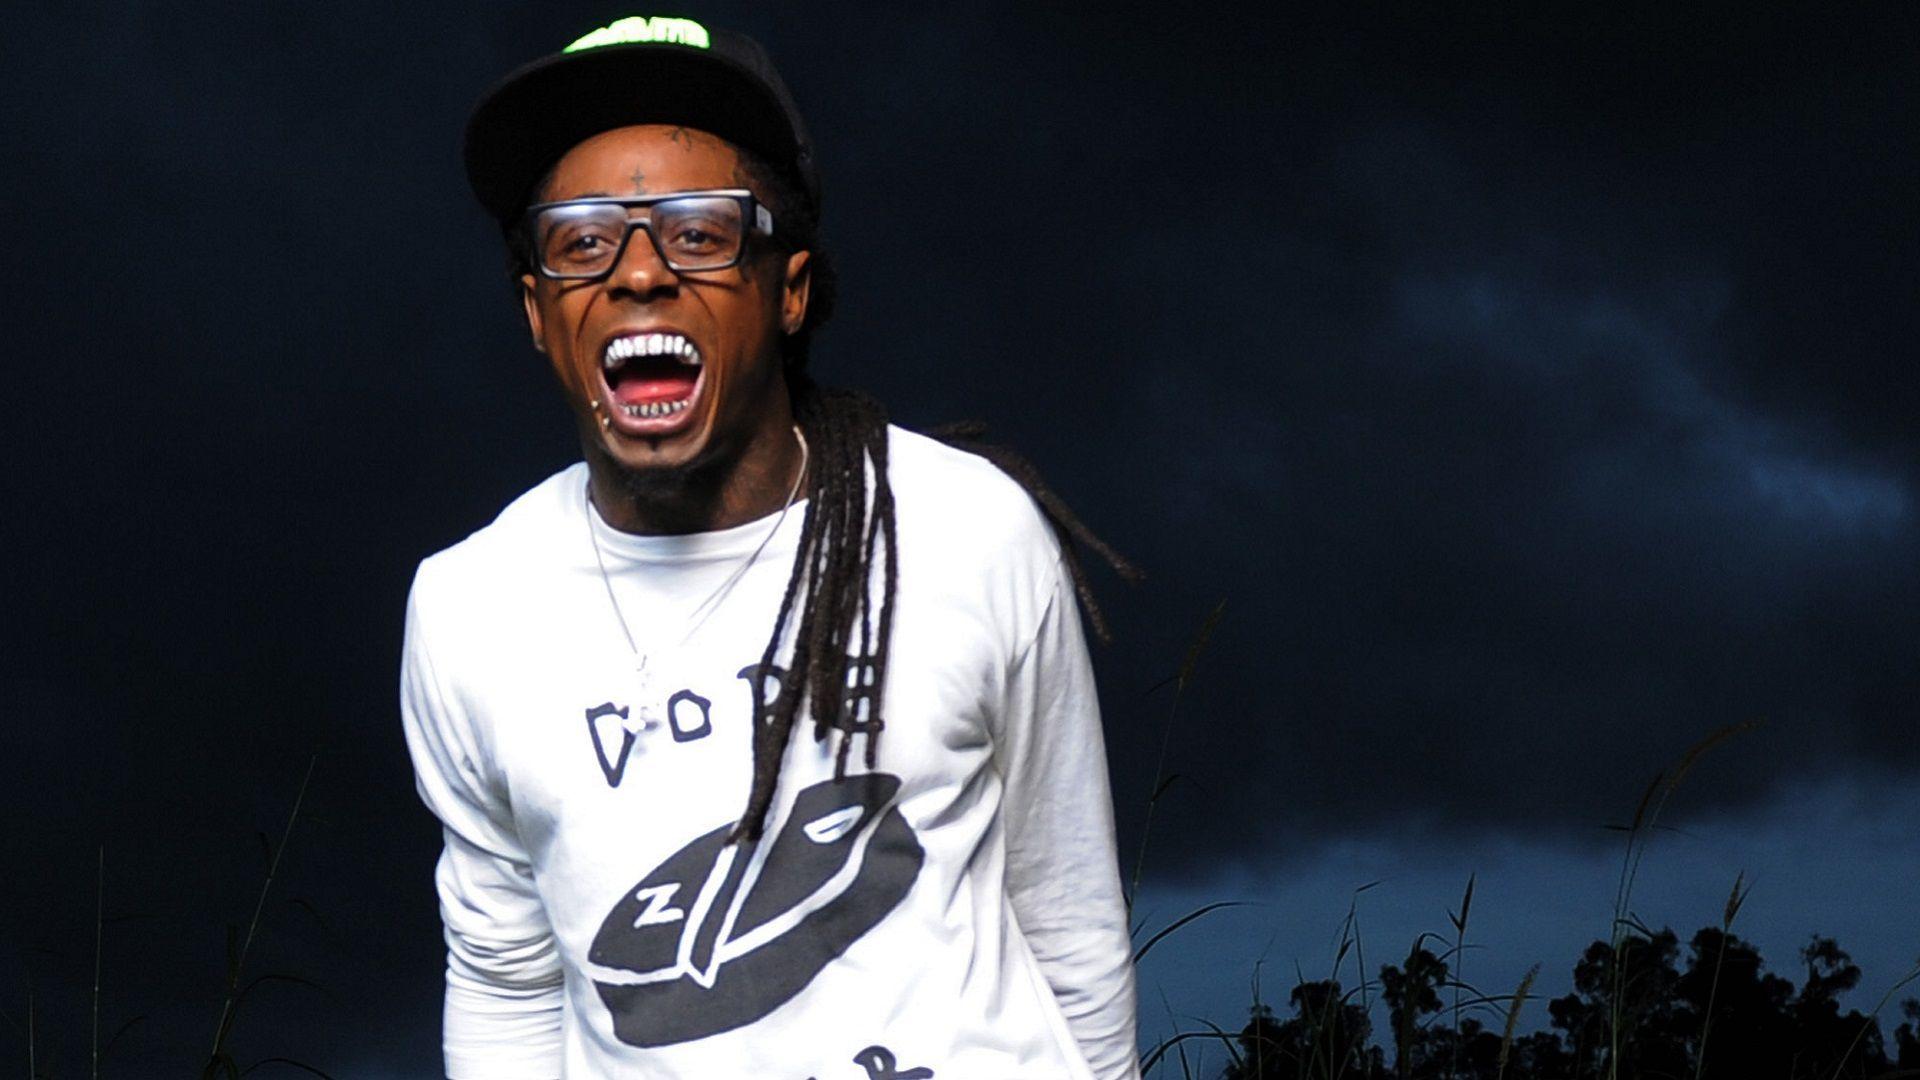 Lil Wayne Wallpaper Collection For Free Download. HD Wallpaper